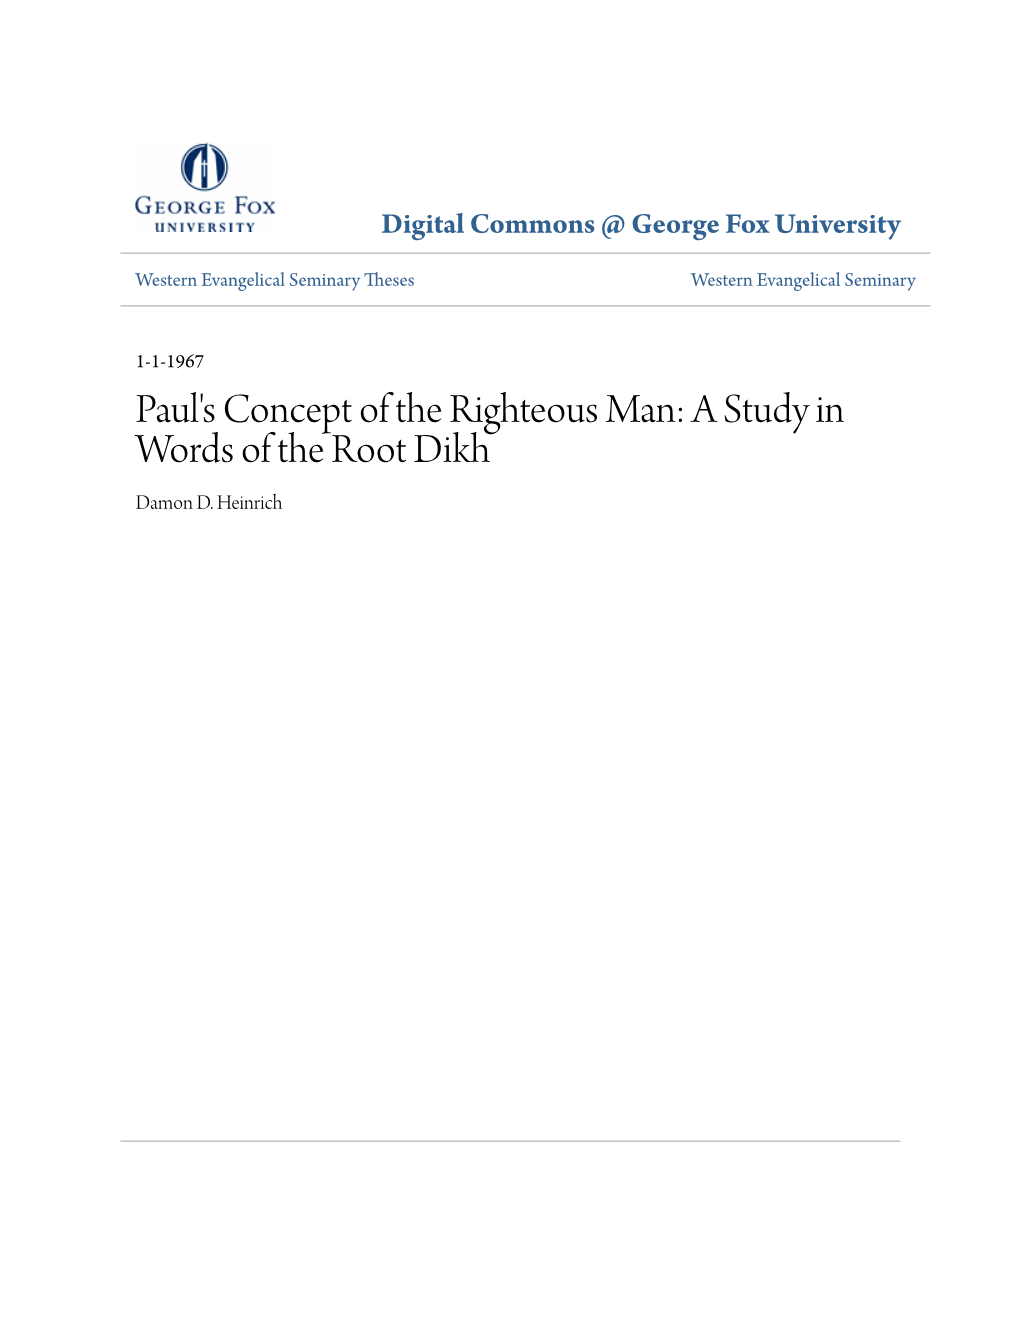 Paul's Concept of the Righteous Man: a Study in Words of the Root Dikh Damon D